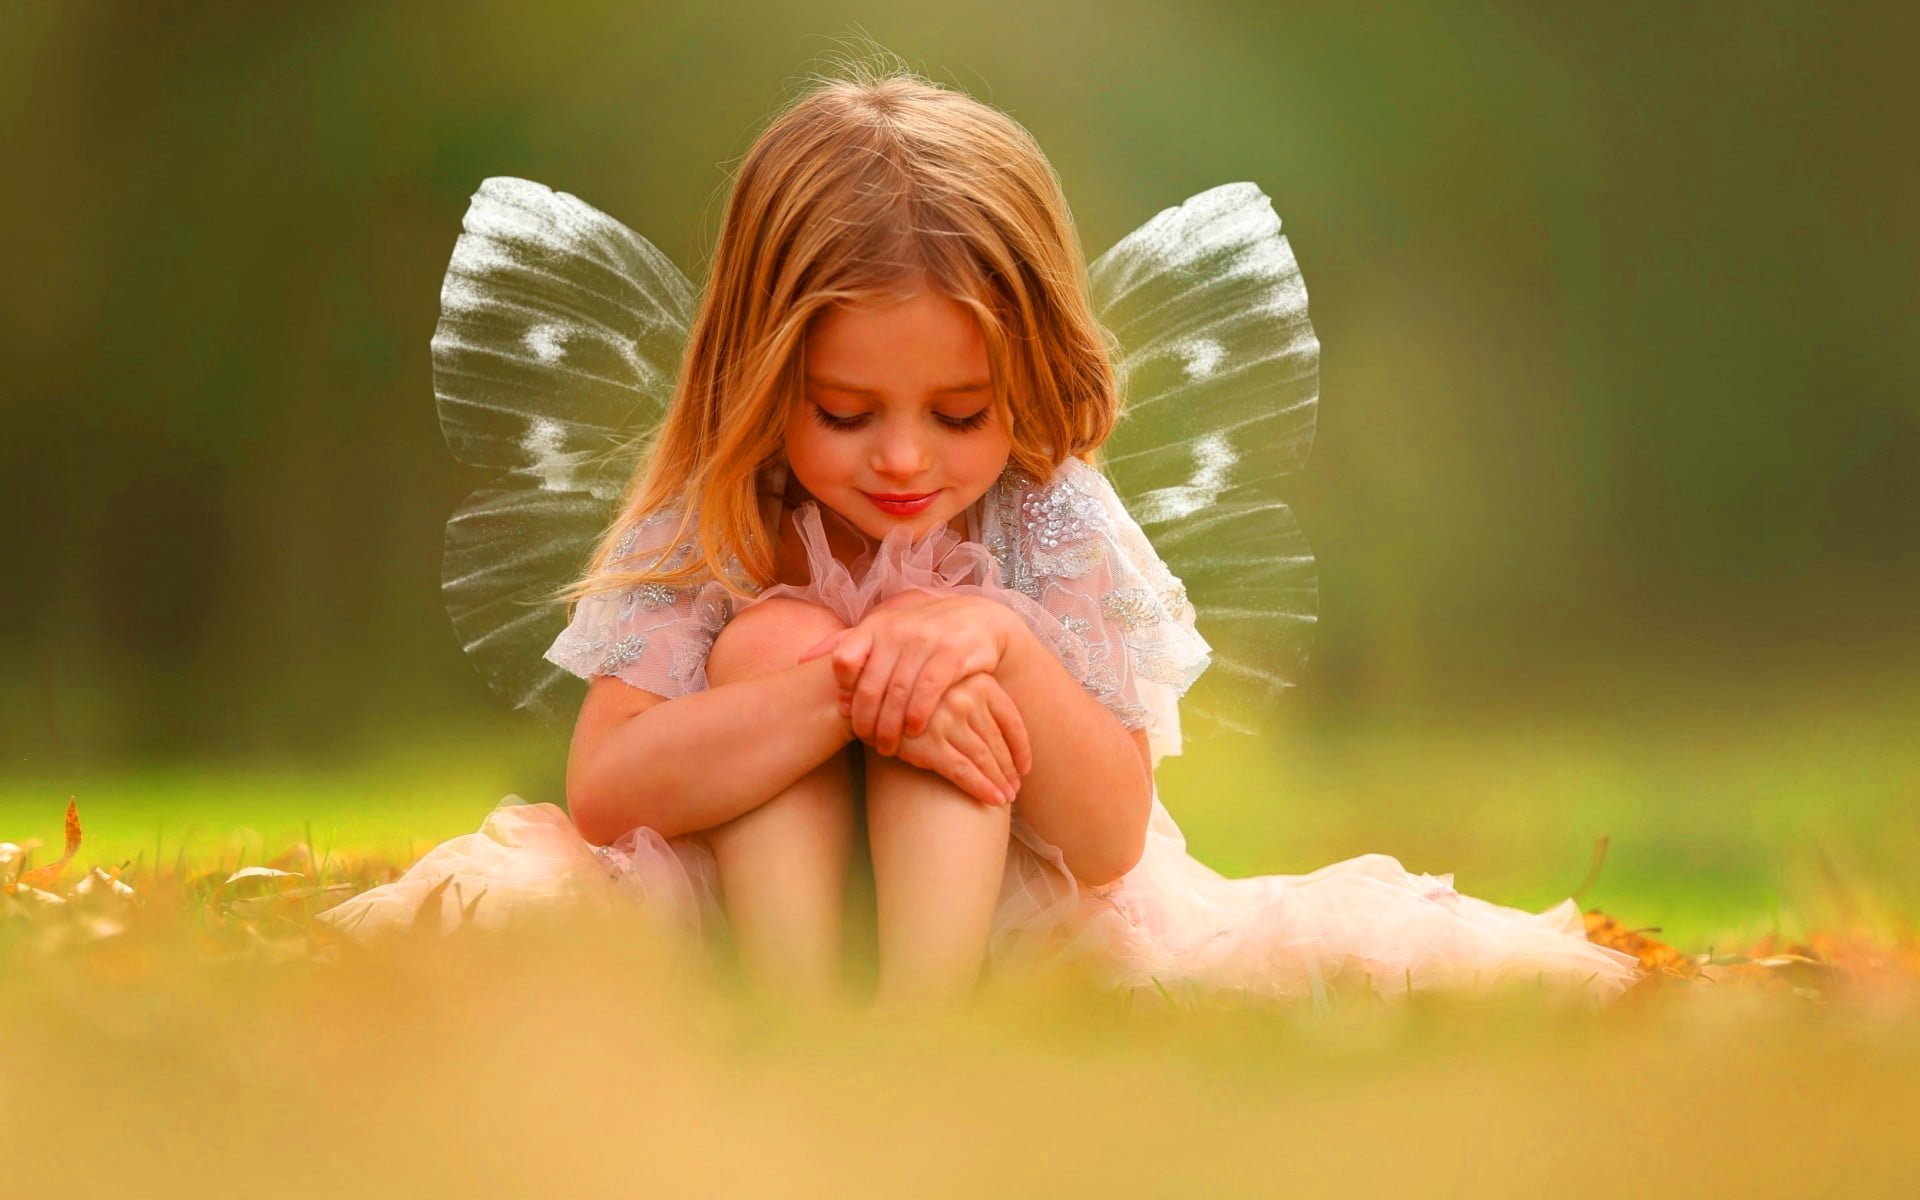 Fairy Wings Girl, white fairy wings, Baby, cute, childhood, one person